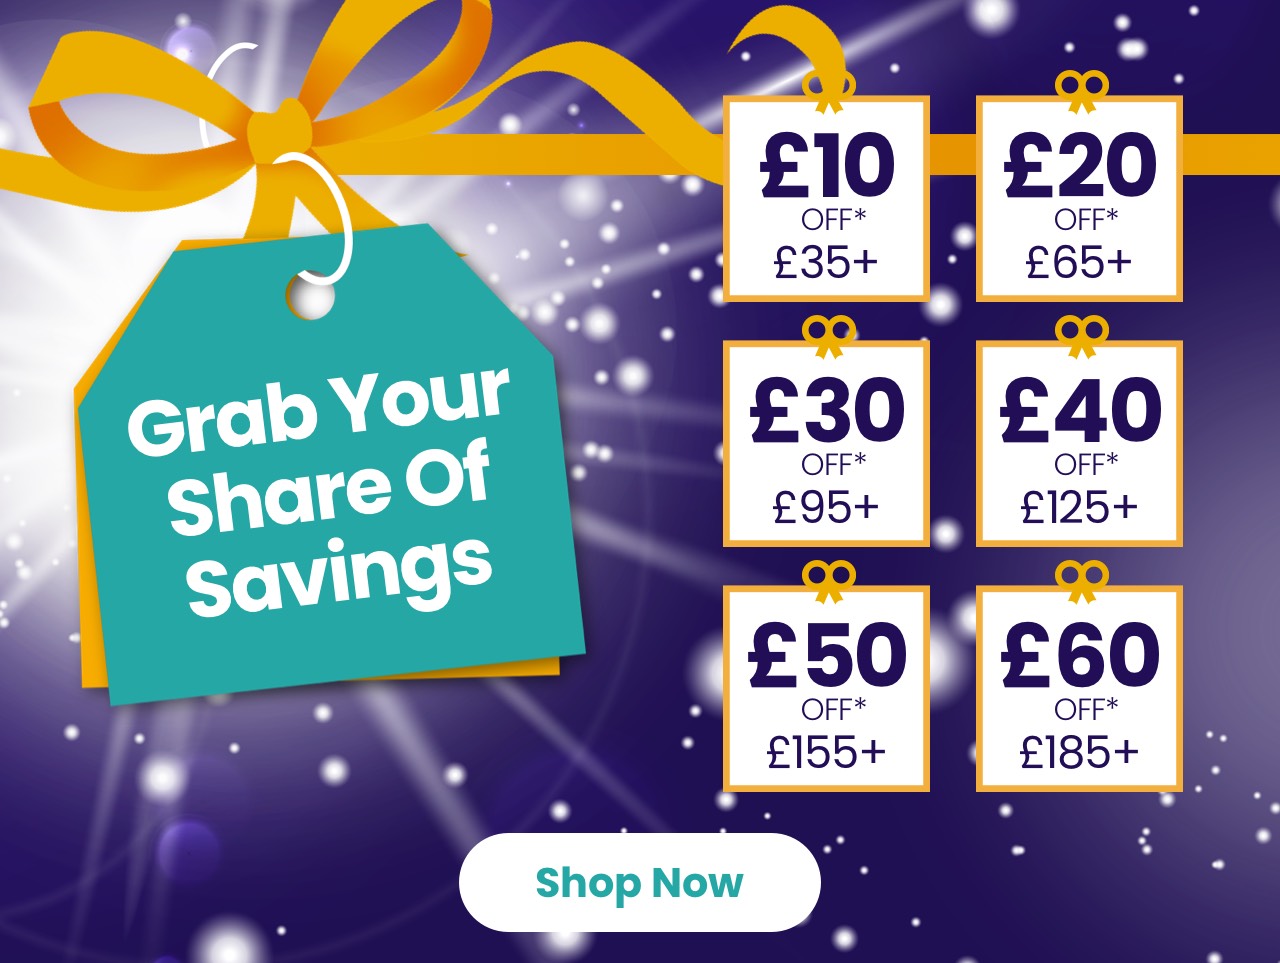 Grab Your Share Of Savings Ends Tonight